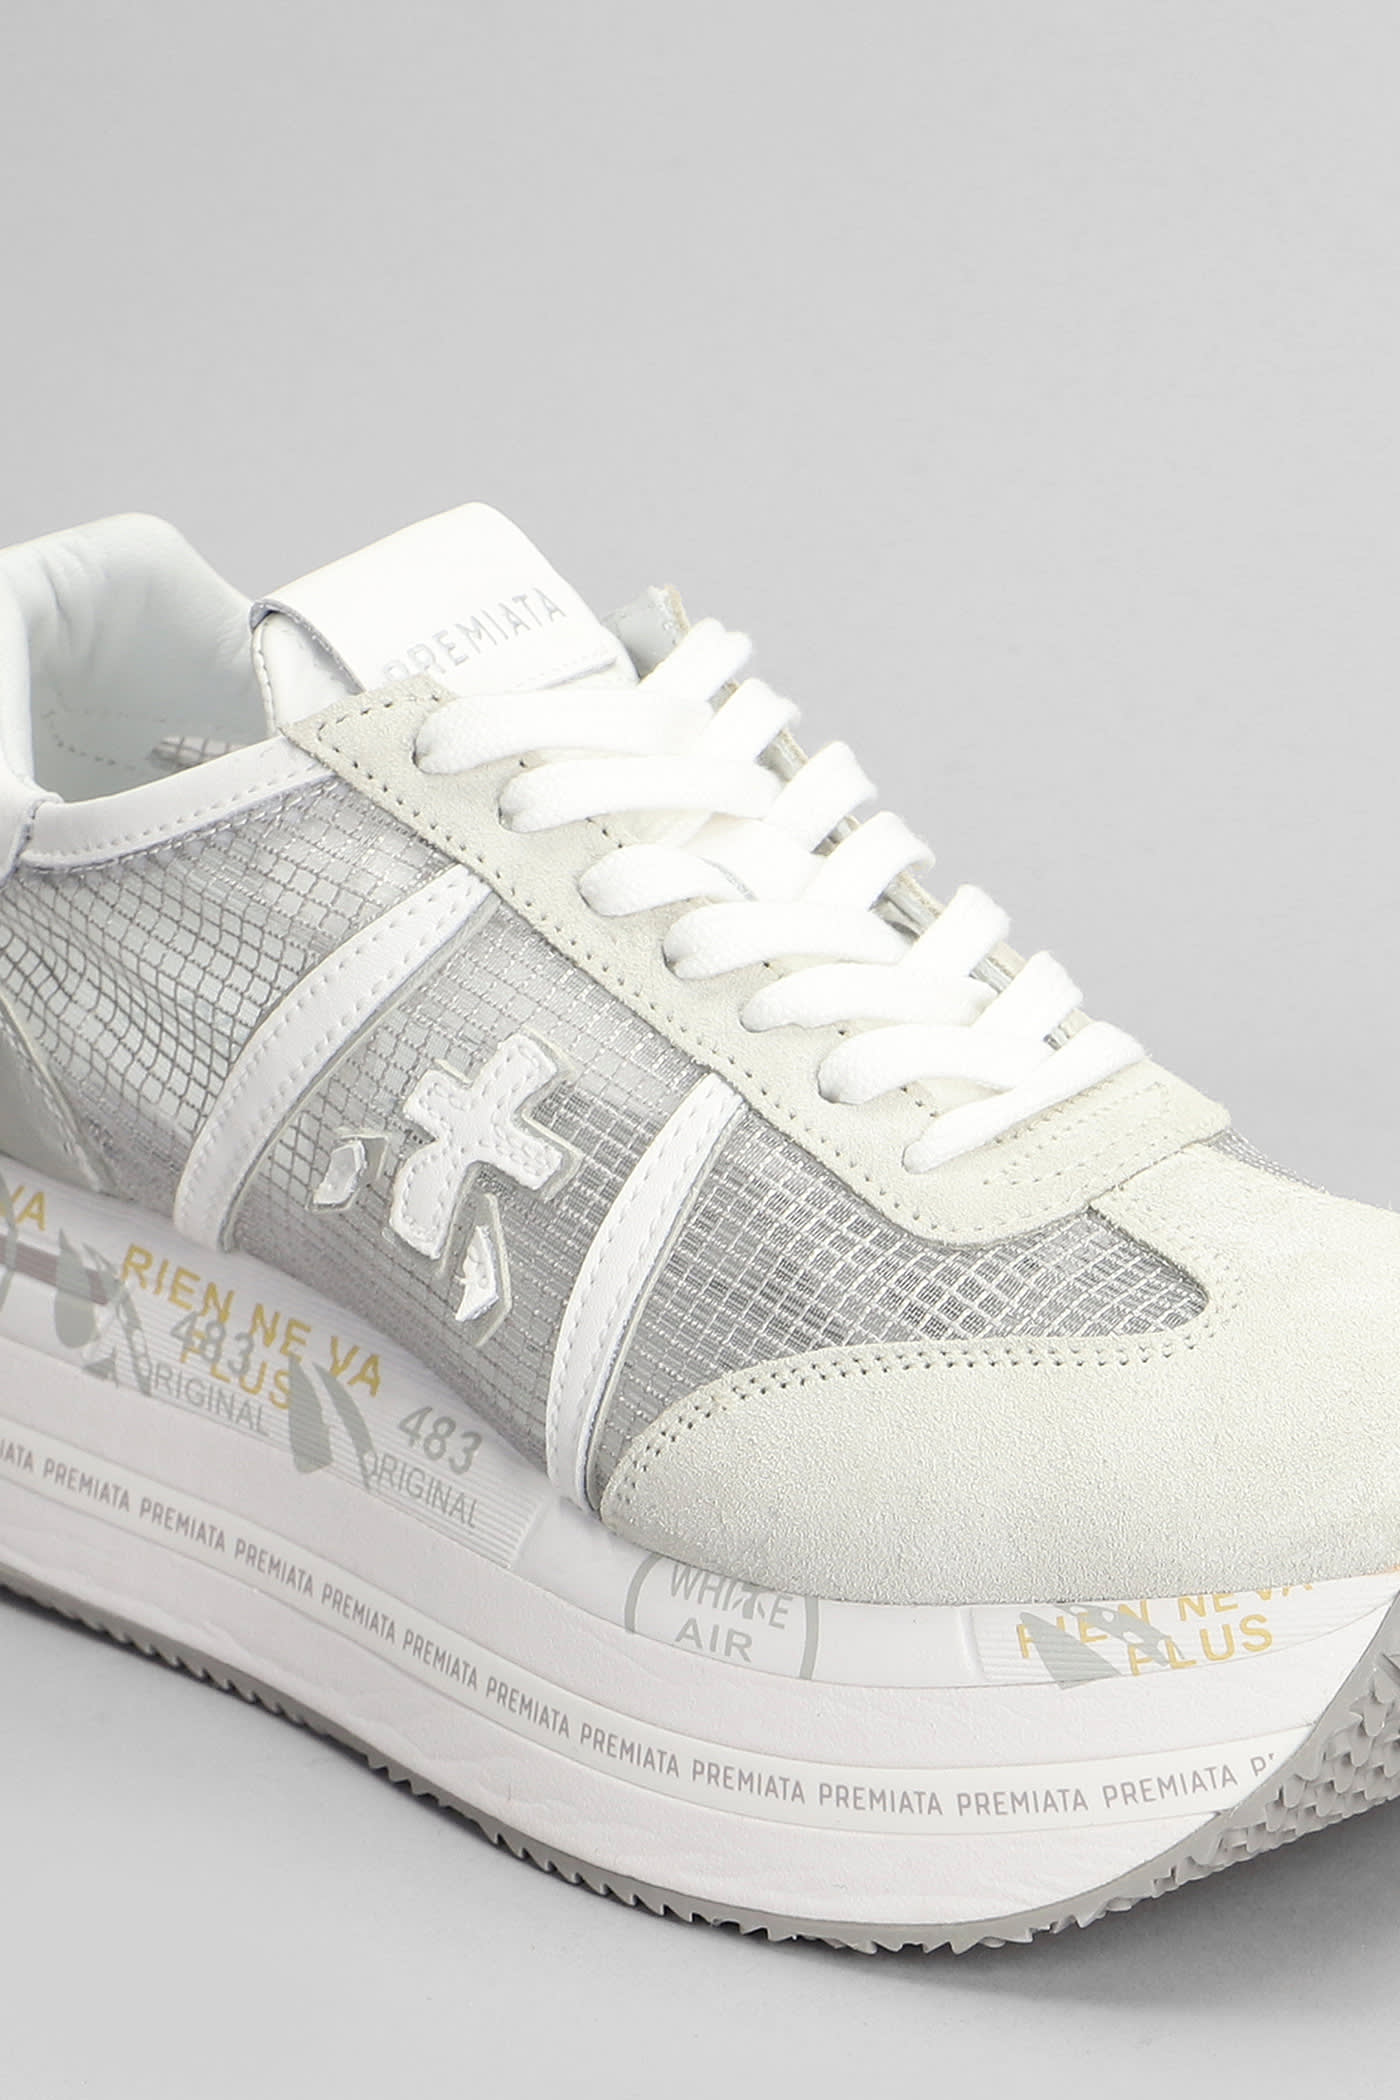 Shop Premiata Beth Sneakers In Grey Suede And Fabric